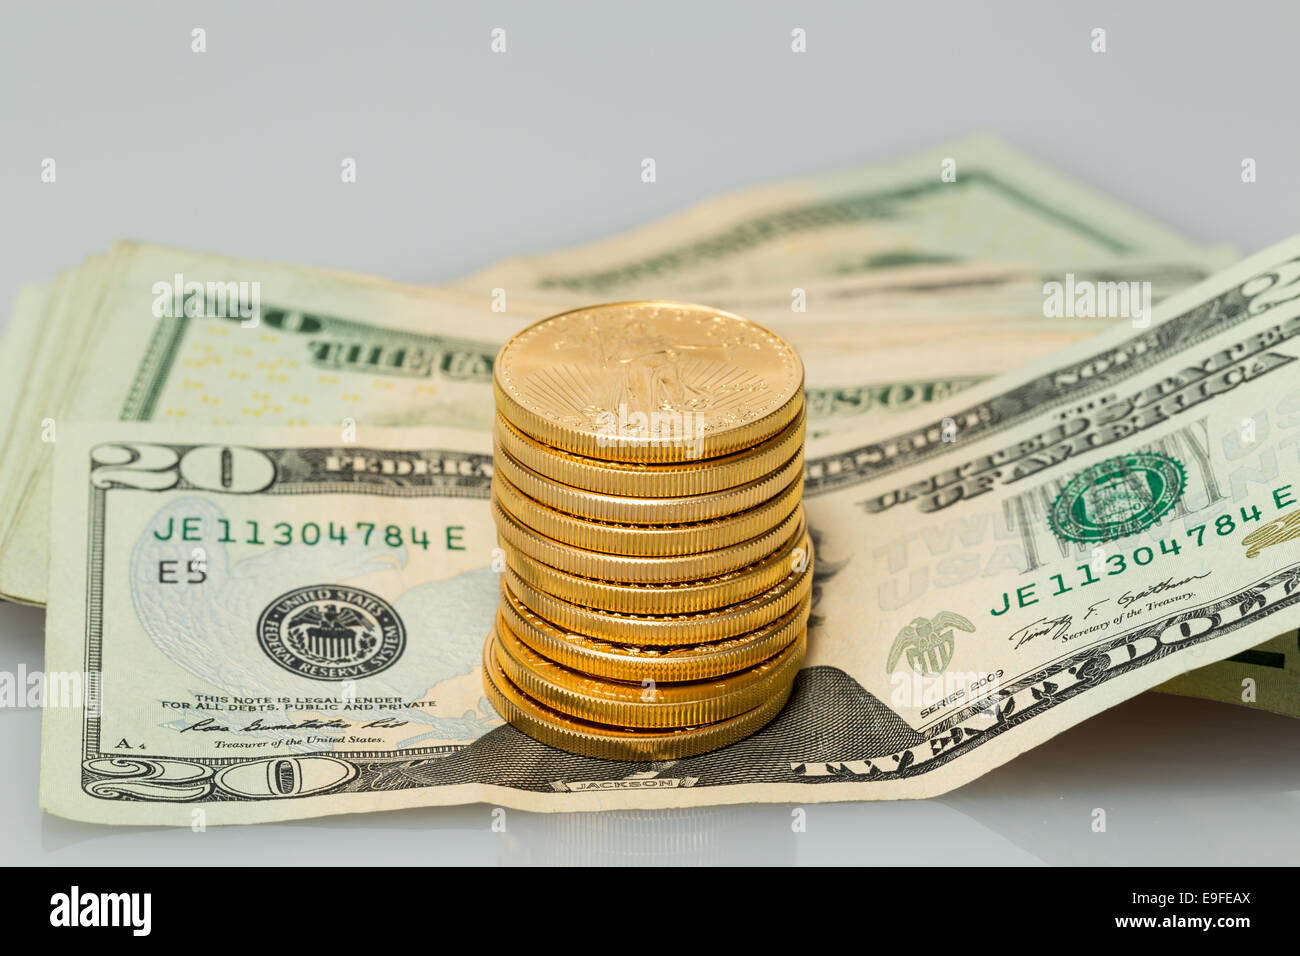 Stack of $20 dollar bills with gold coins Stock Photo